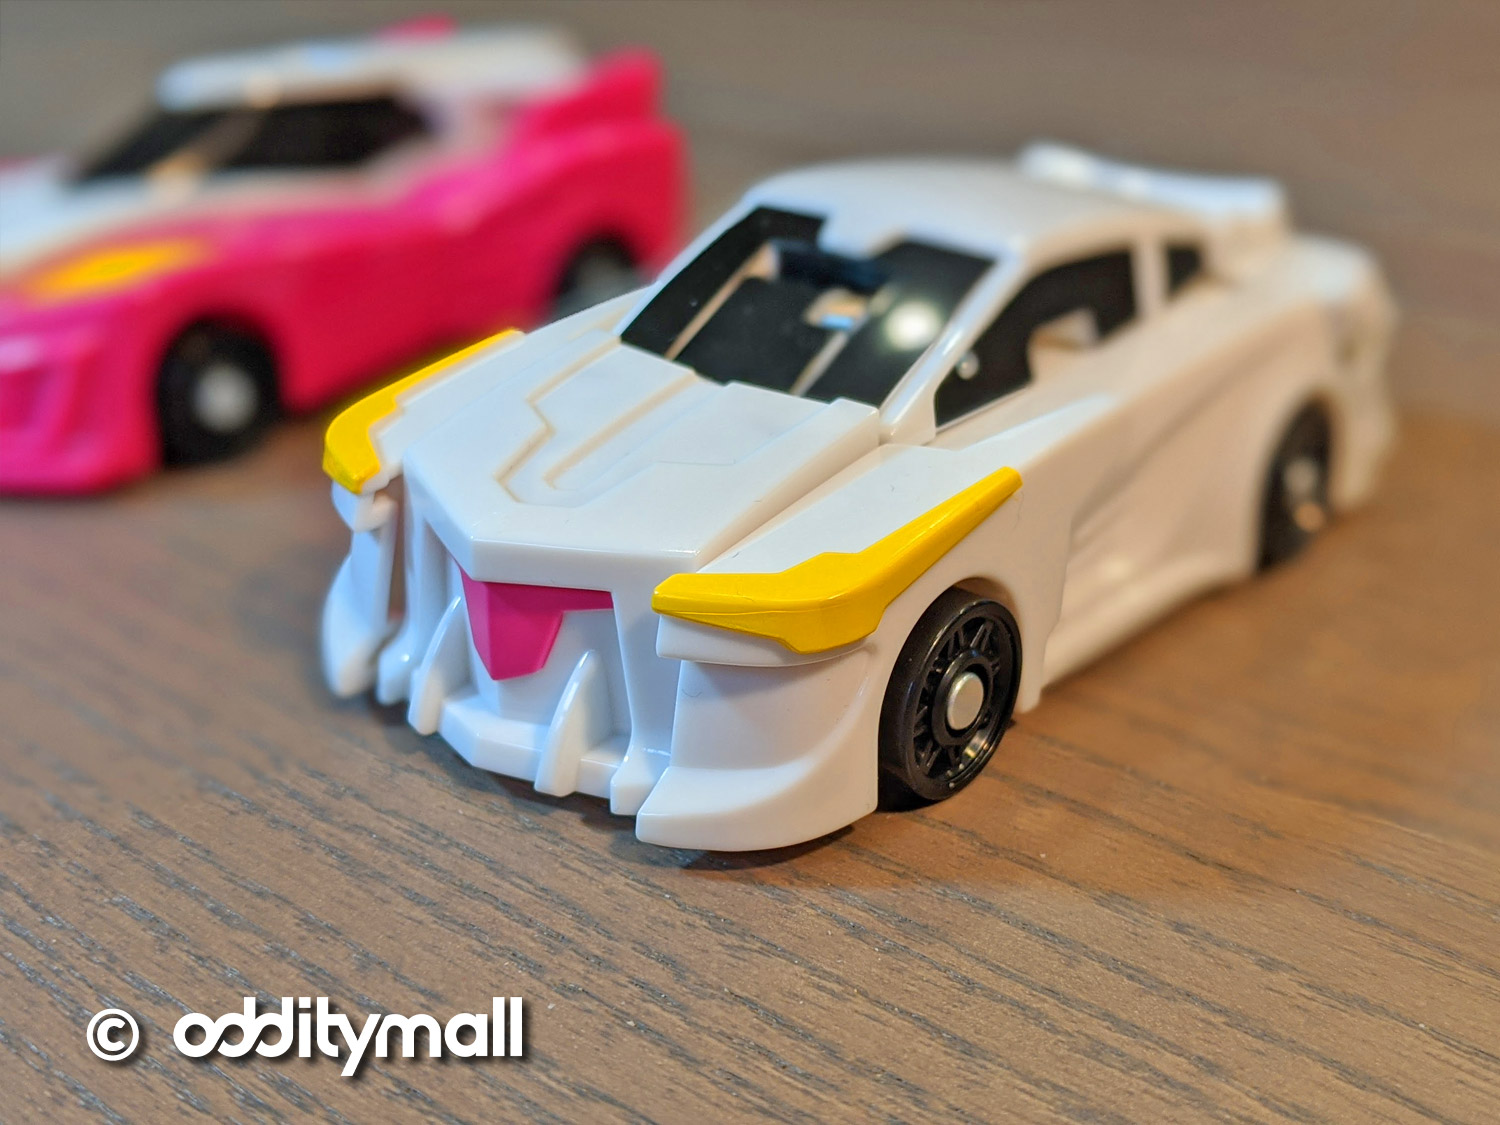 CarBot Magnetic Cars That Transform Into a Unicorn - Magnetic transforming toy